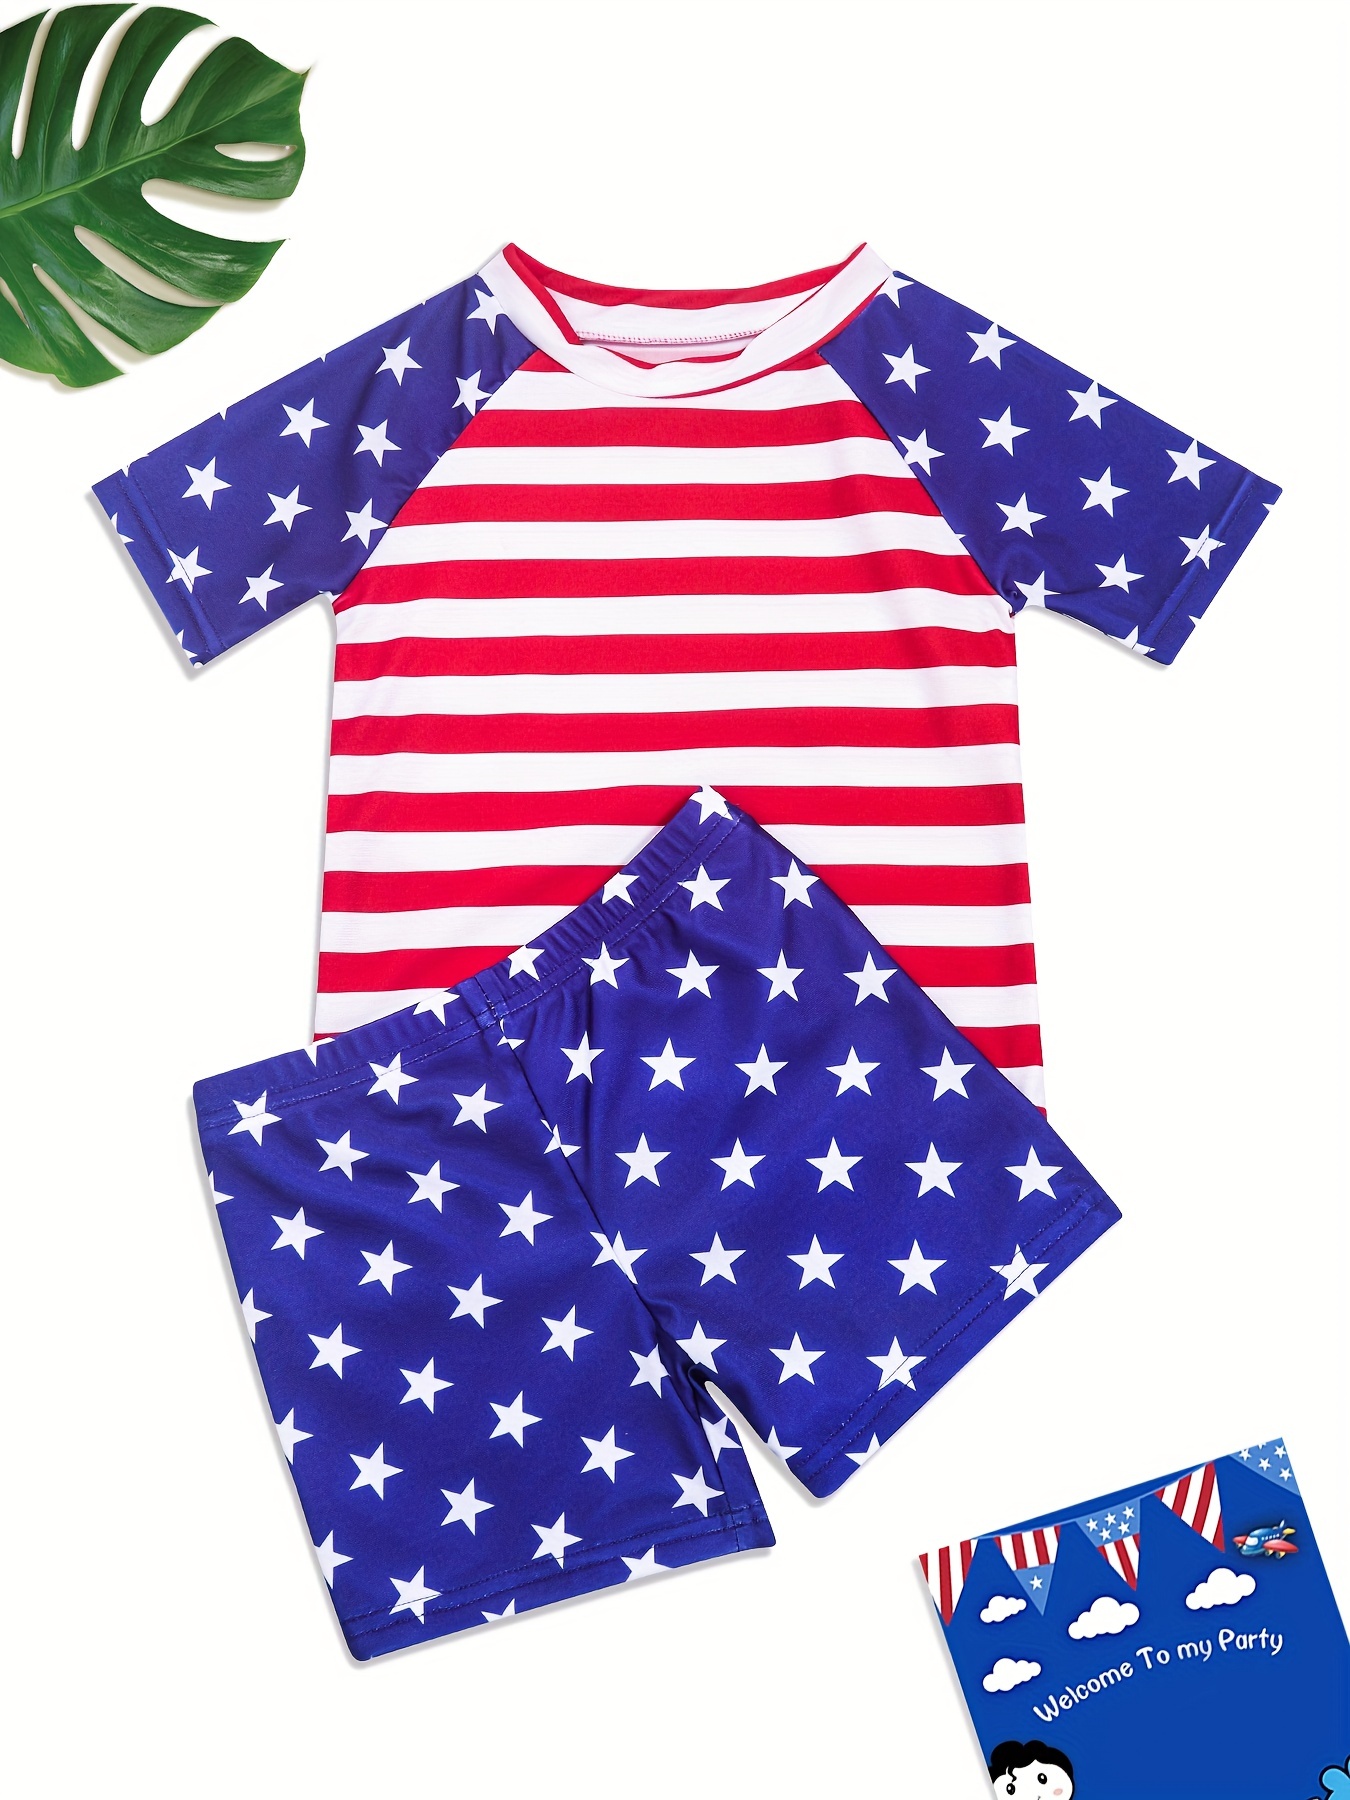 Boys Star And Stripe Swimming Suit Swimming Trunks & Tops For Beach ...